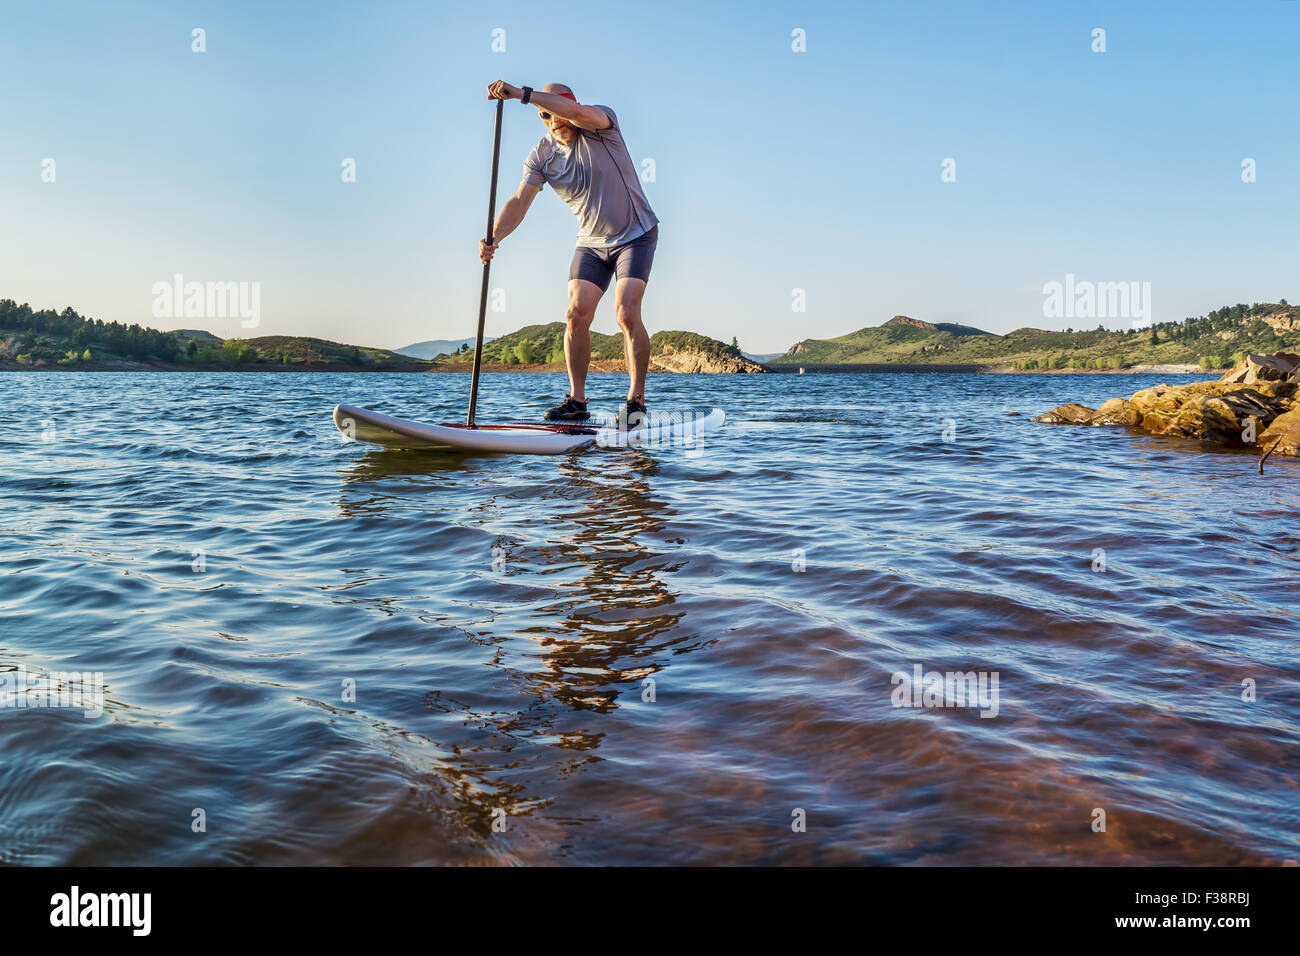 stand up paddling workout on Horsetooth Reservoir at foothills of Rocky Mountains near Fort Collins, Colorado, summer scenery Stock Photo